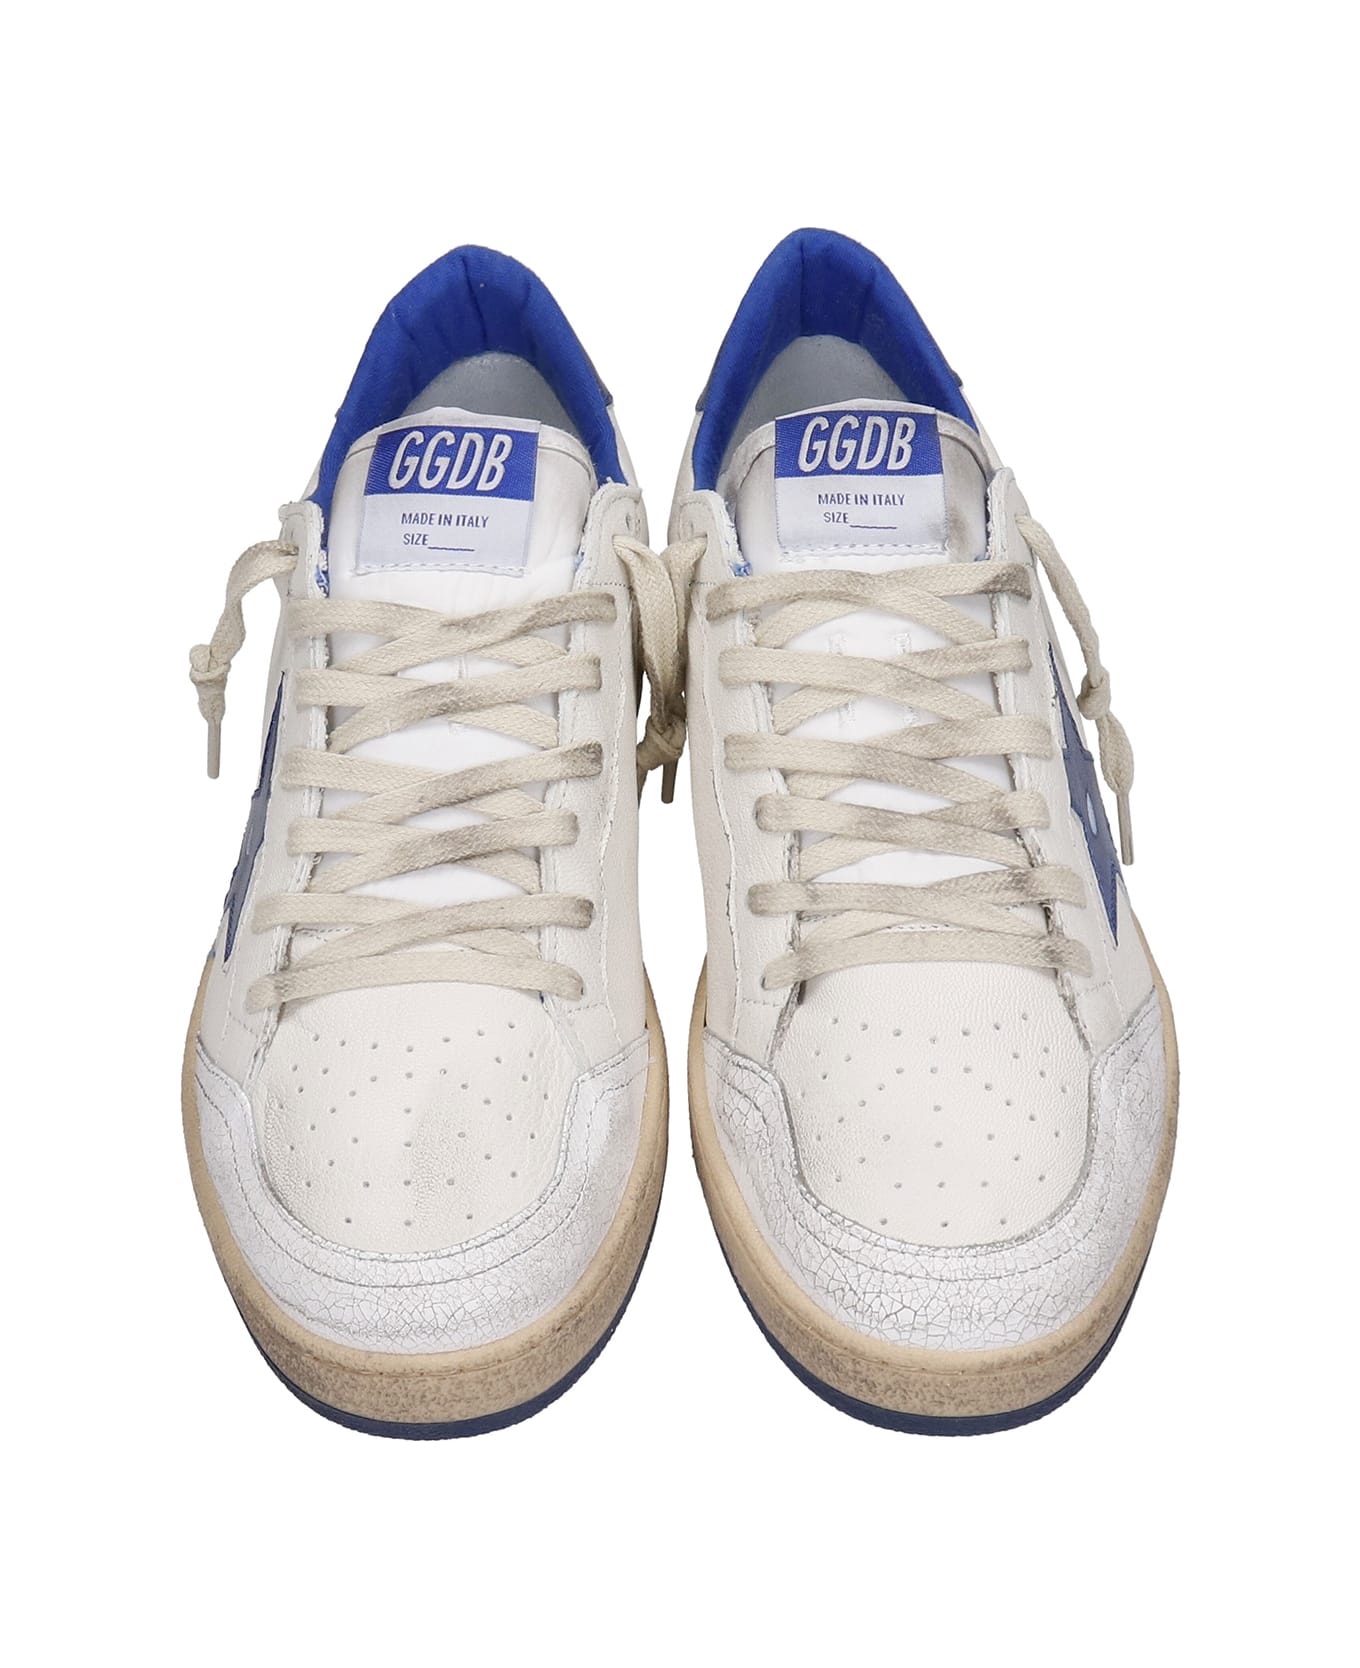 Golden Goose Ball Star Sneakers In White Leather - Bianco